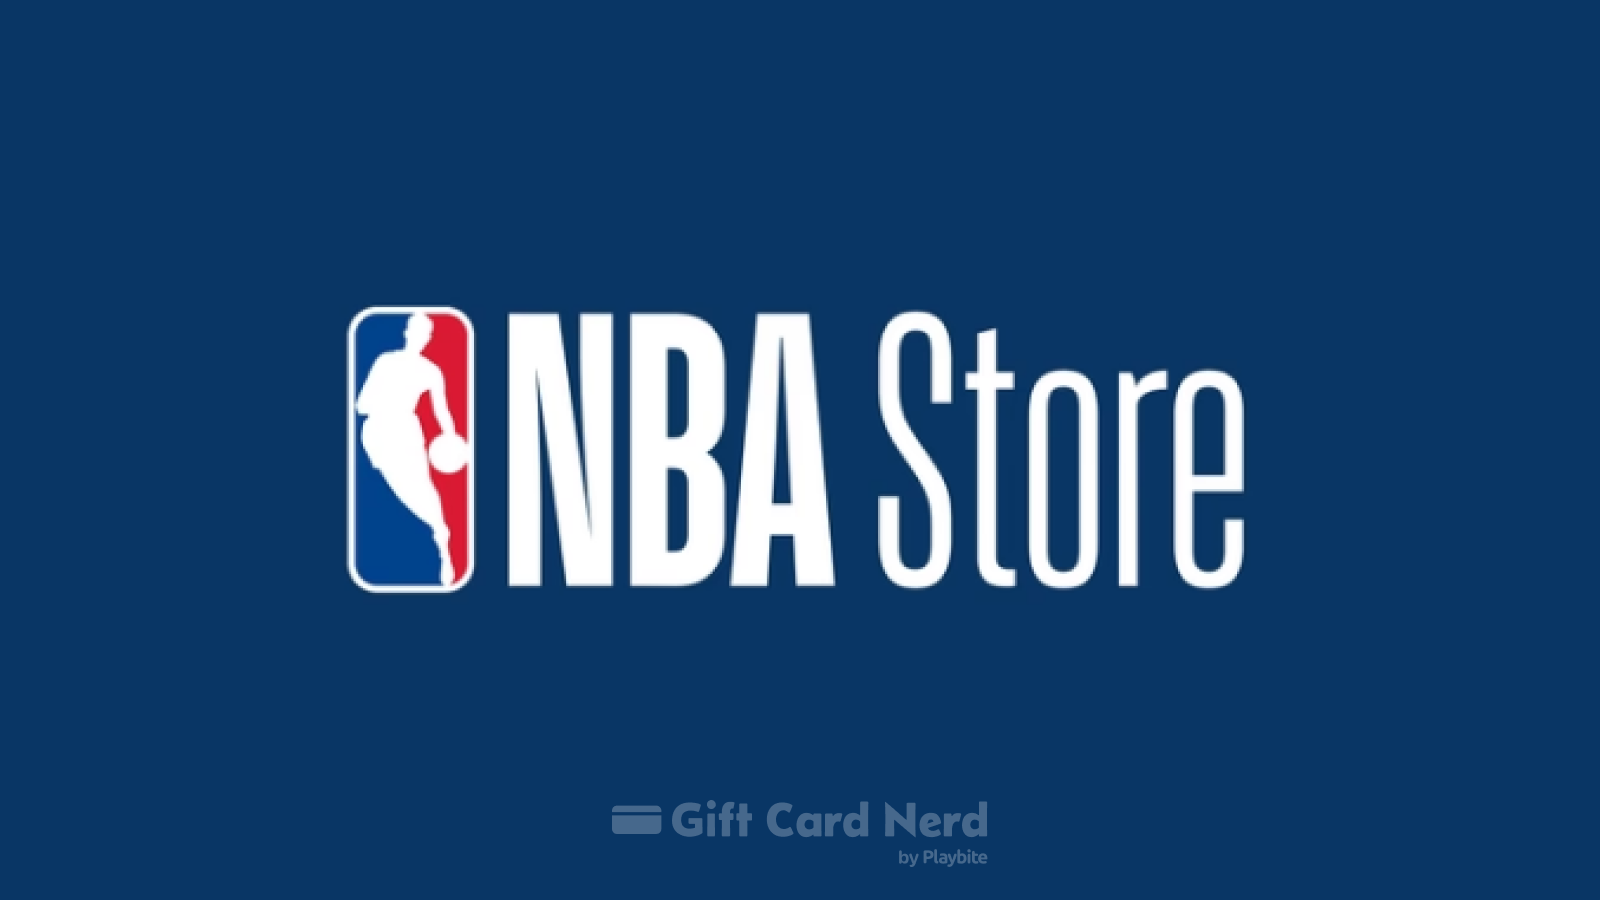 Can I Use a NBA Store Gift Card on Google Play Store?